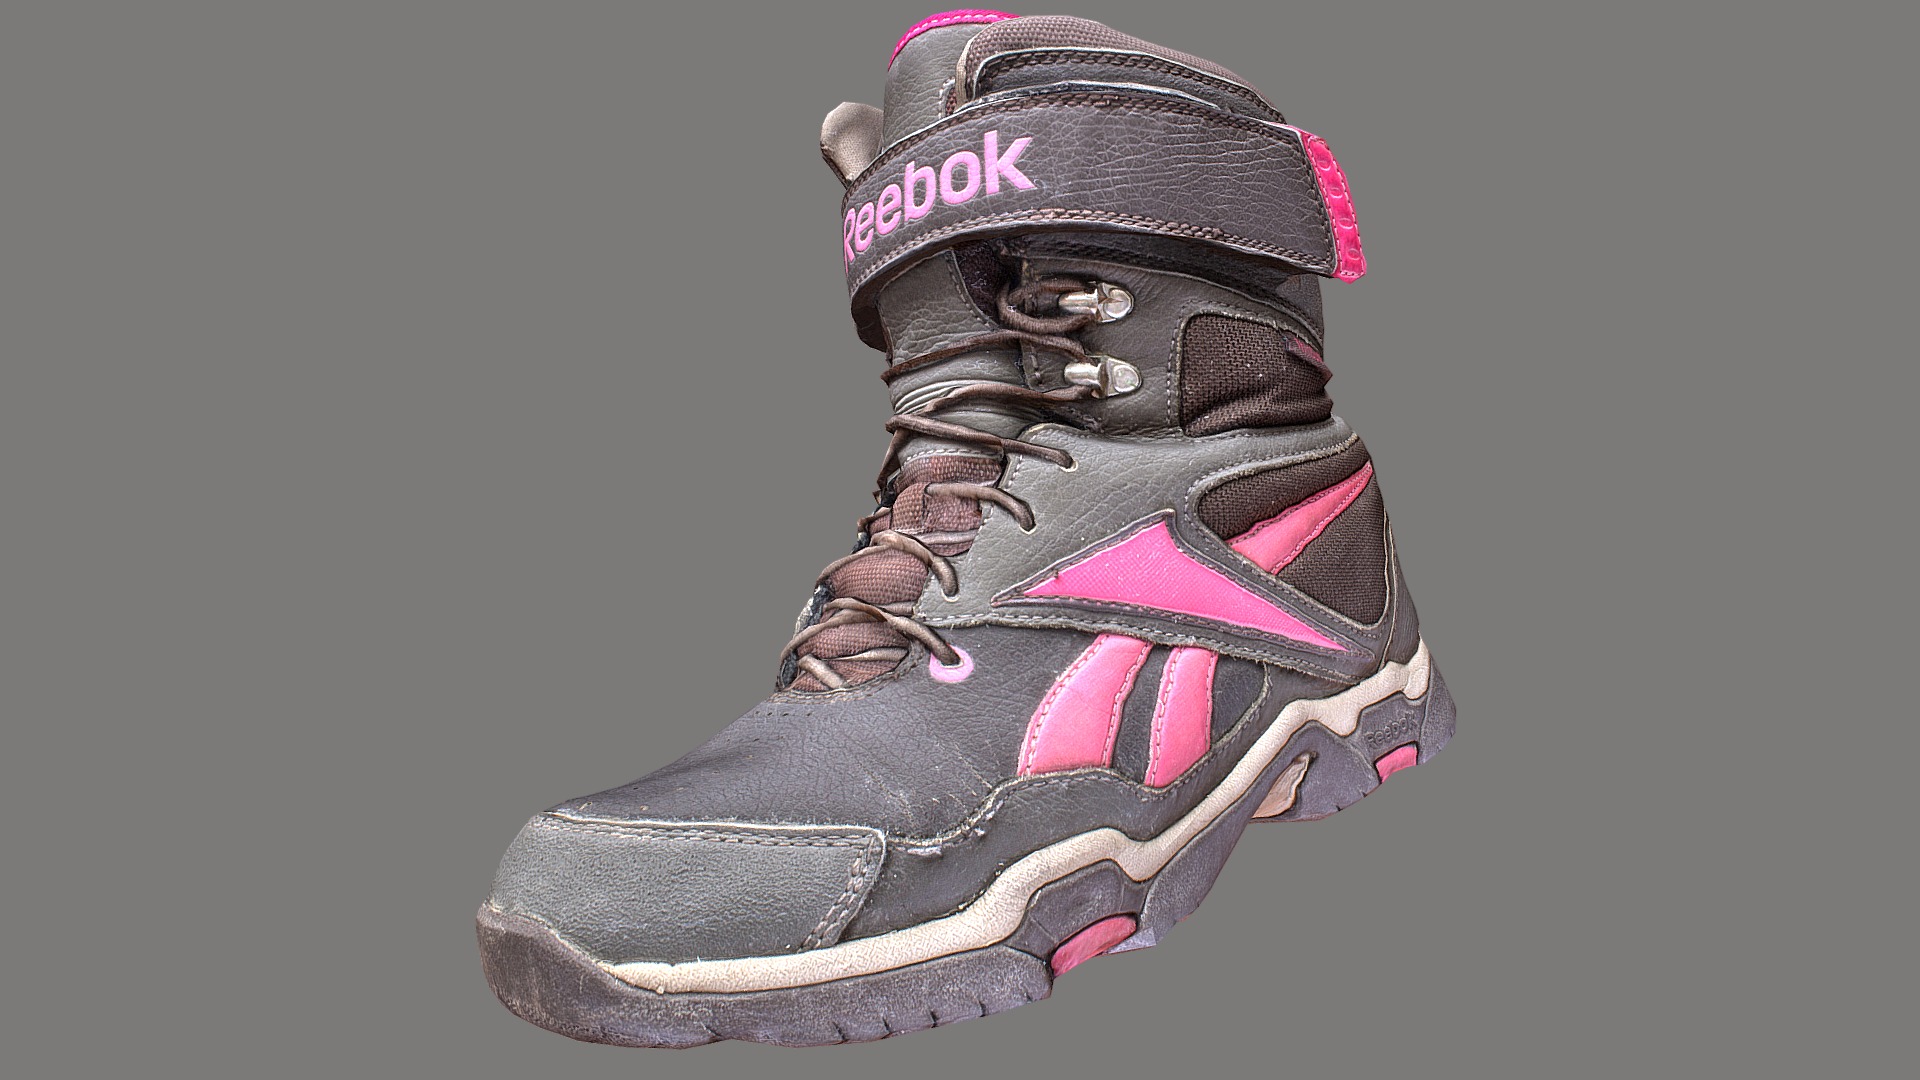 3D model Boot low poly - This is a 3D model of the Boot low poly. The 3D model is about a pair of black and pink shoes.